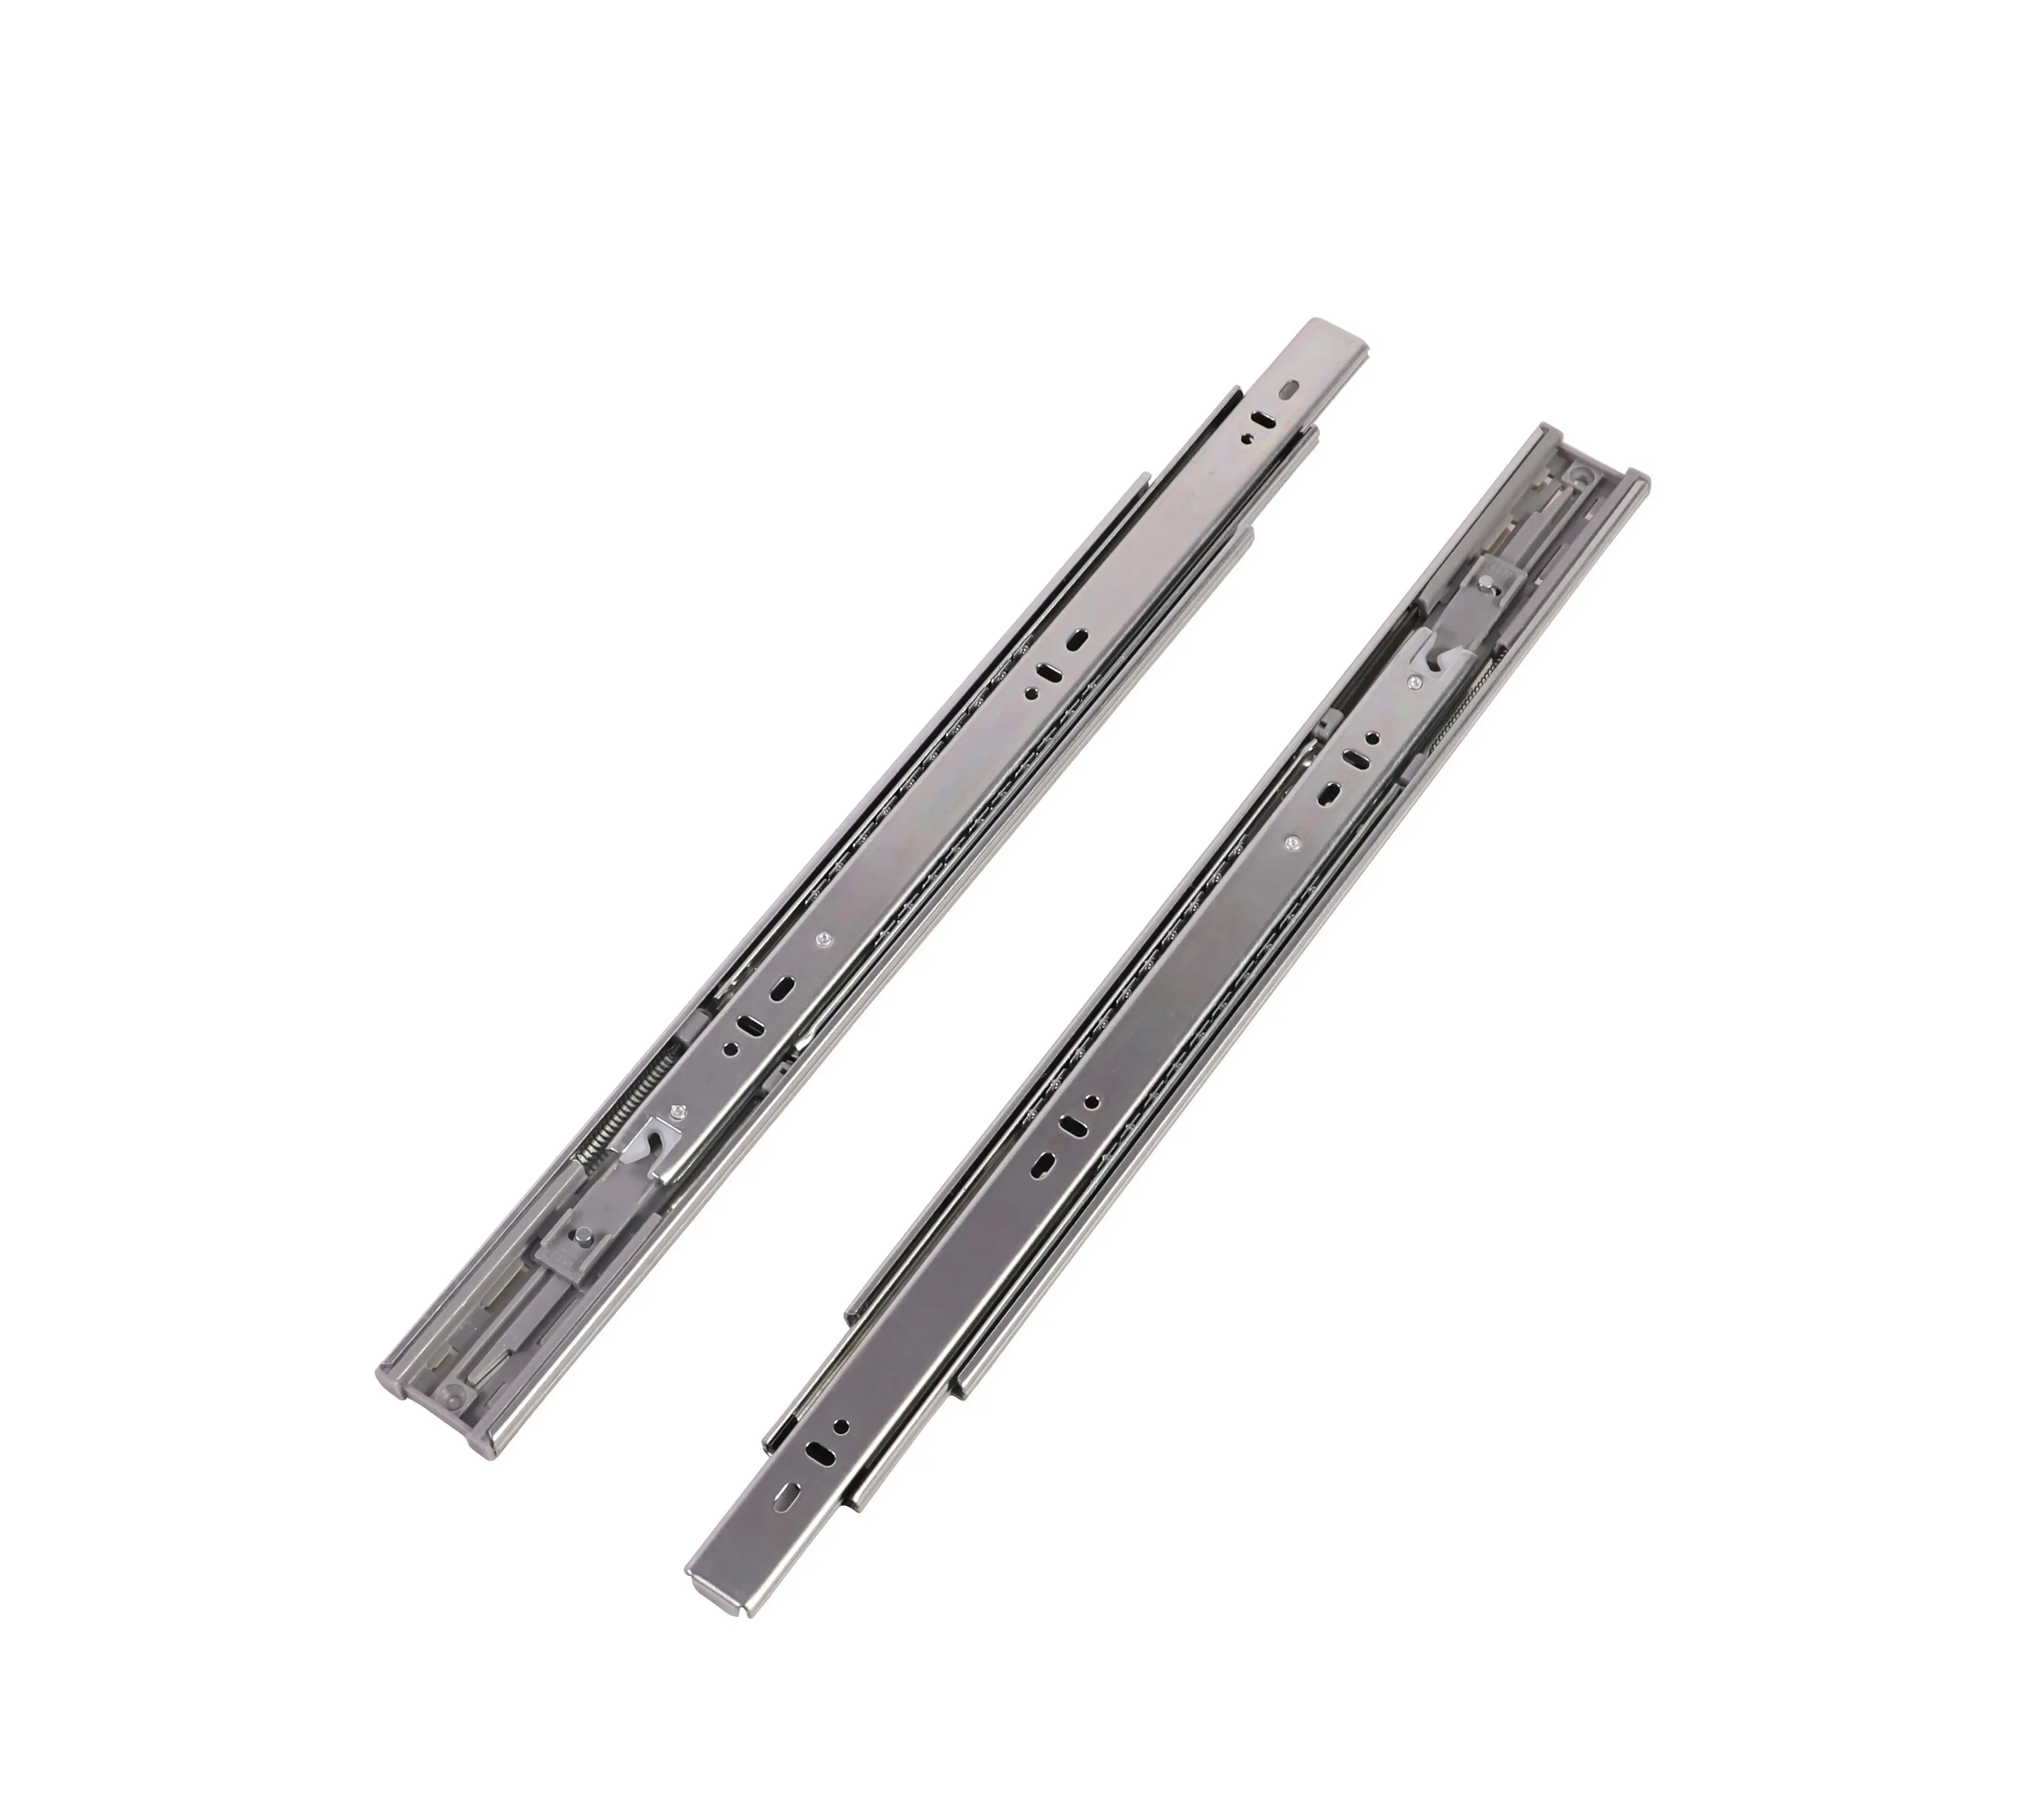 Jieyang Lajia factory 45 mm Rail Excellent quality telescopic channel ball bearing zinc black finish drawer slide